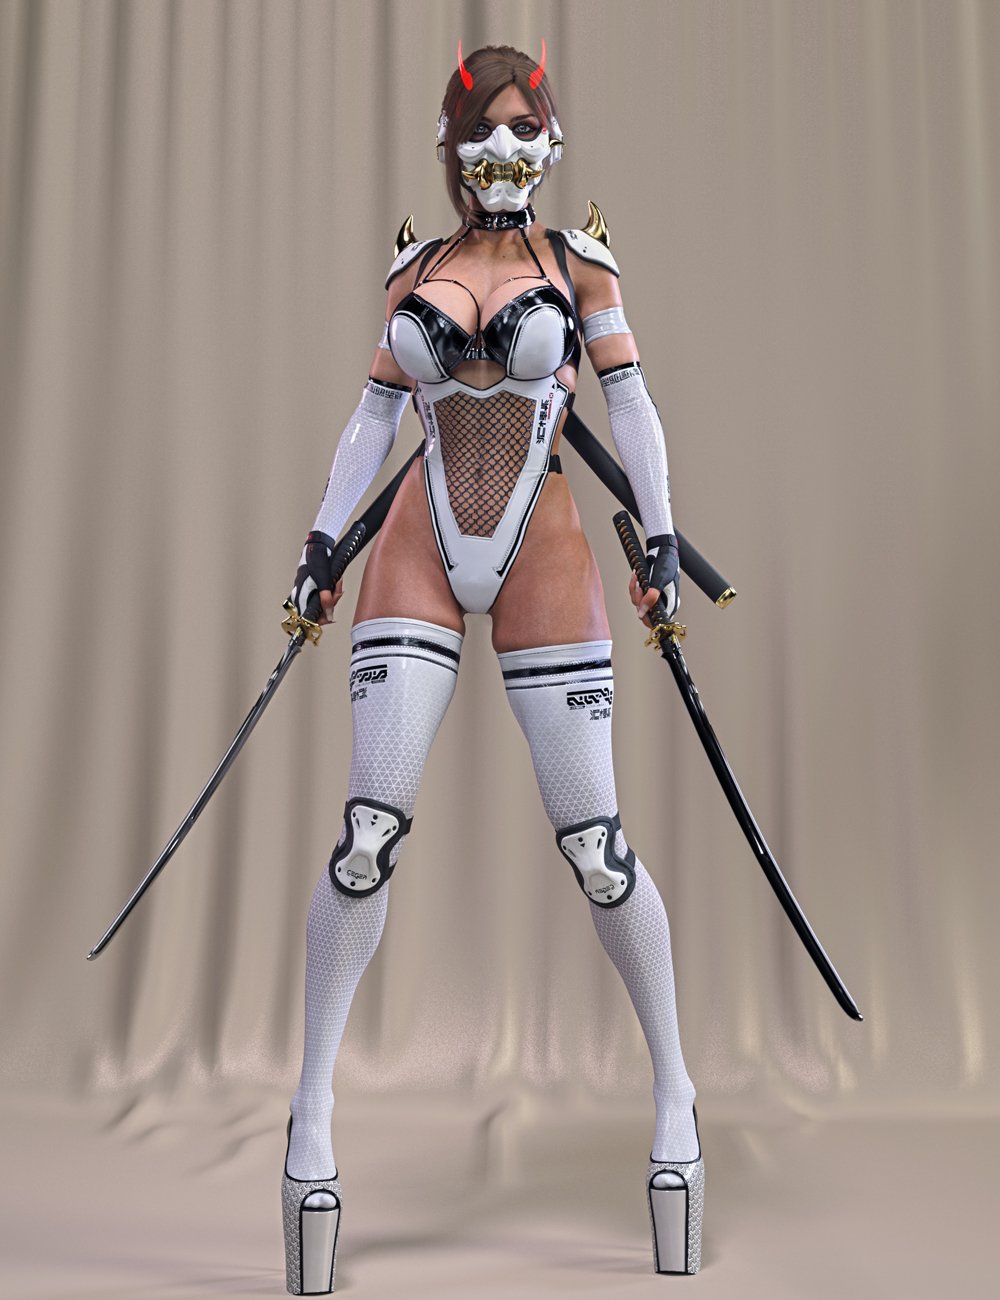 Cyber Samurai Expansion for Umbra Outfit by: Herschel Hoffmeyer, 3D Models by Daz 3D